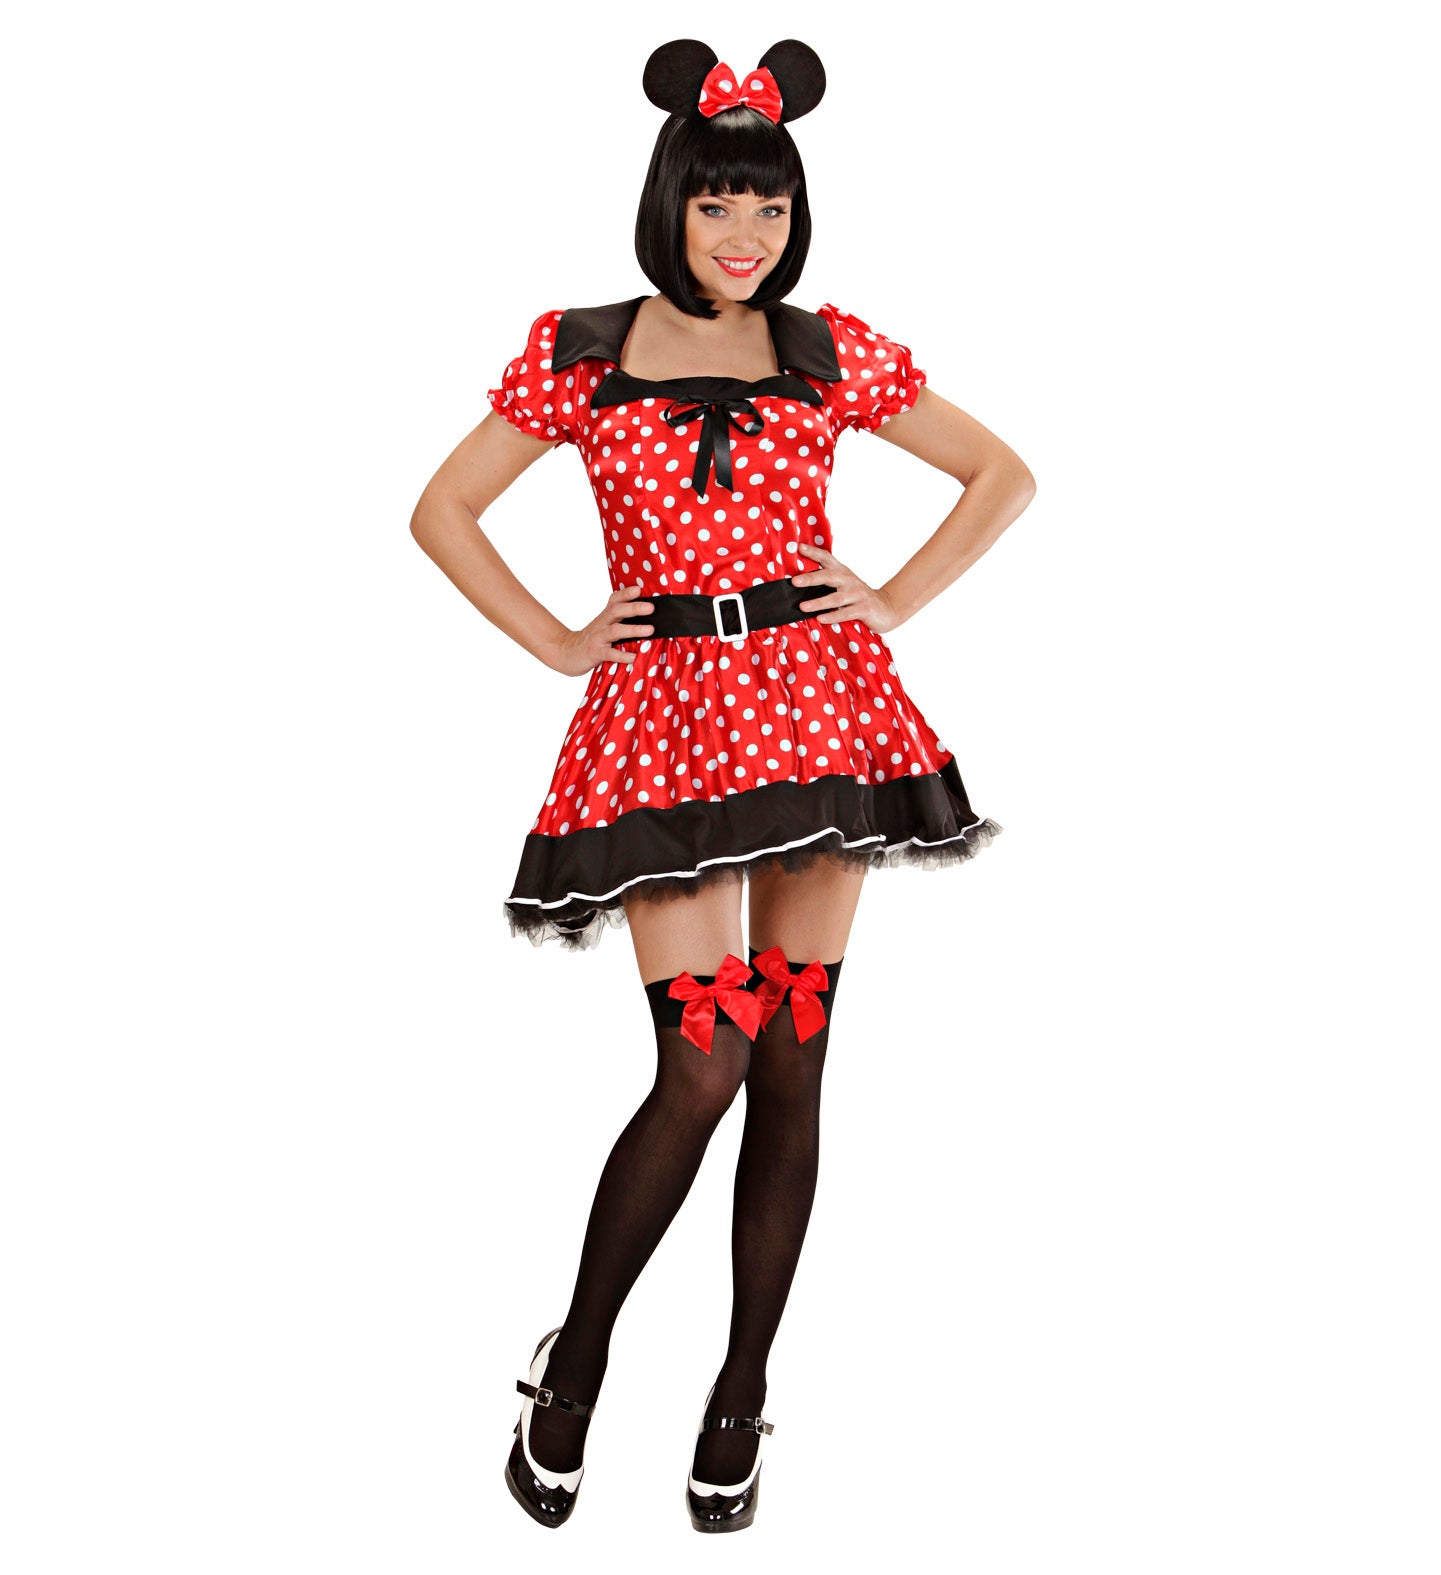 Miss Mouse outfit adult